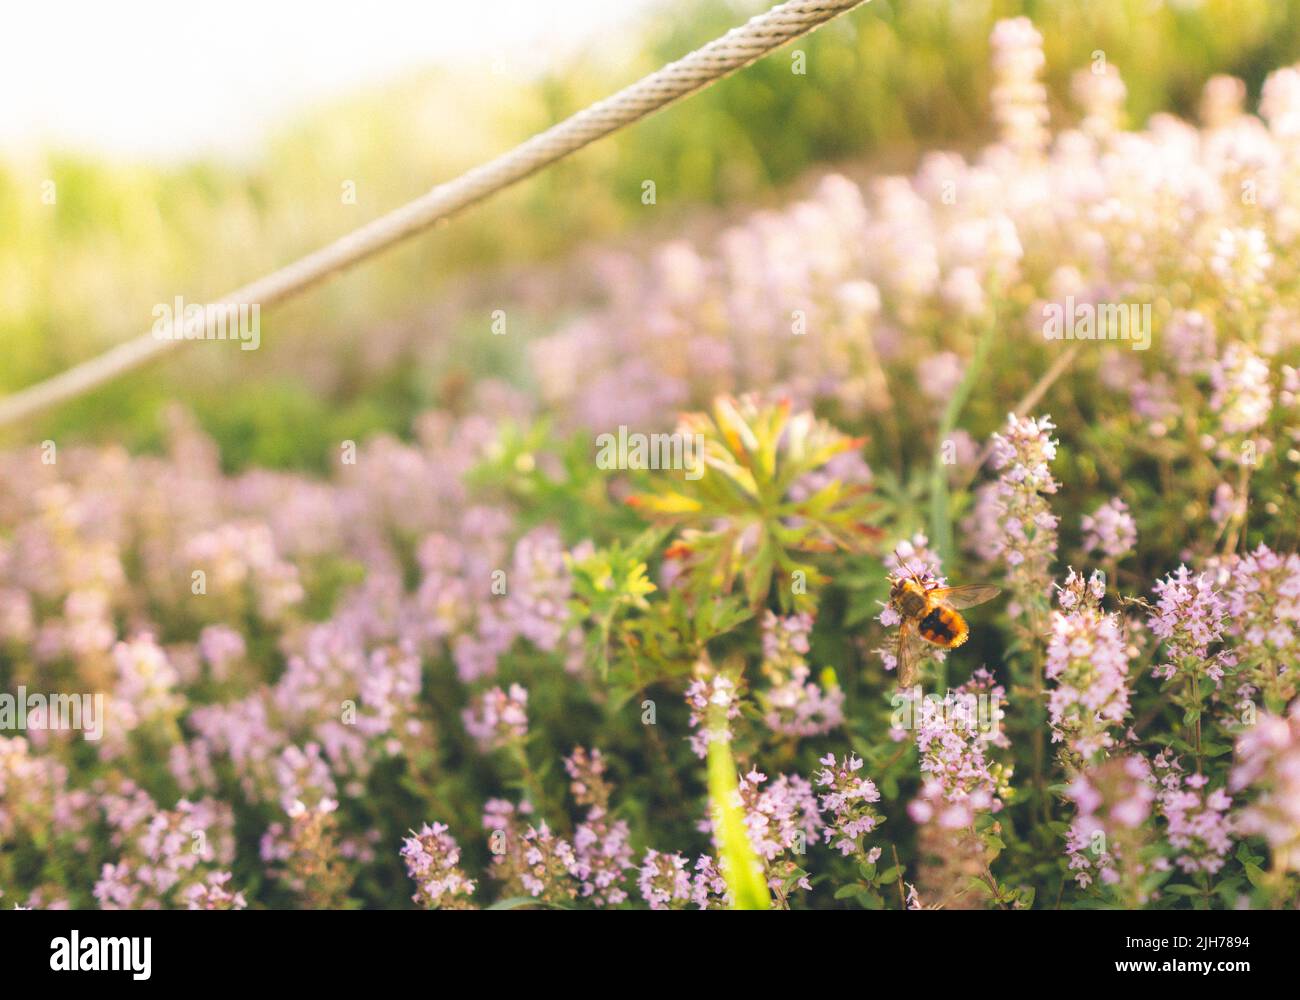 a bee perched on a lavender flower in a garden. The photo focus at the bee on the foreground and the background is blurry. Stock Photo